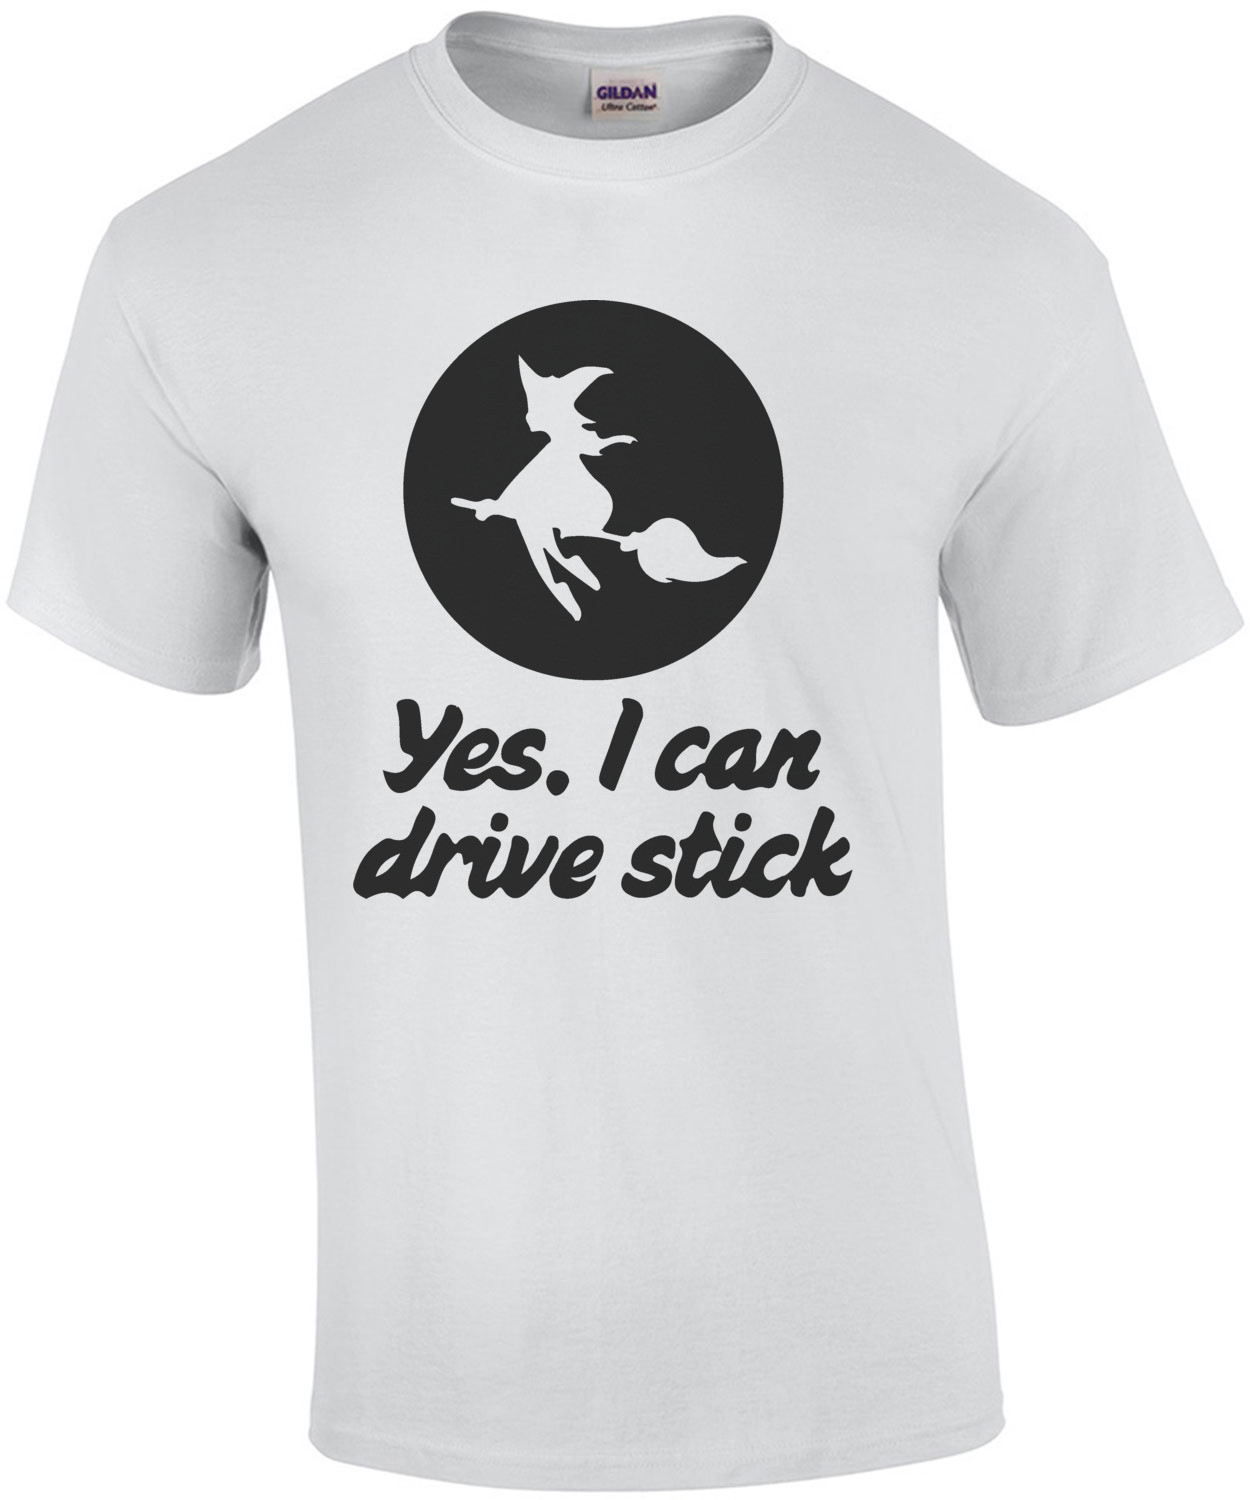 Yes, I can drive stick. Witch